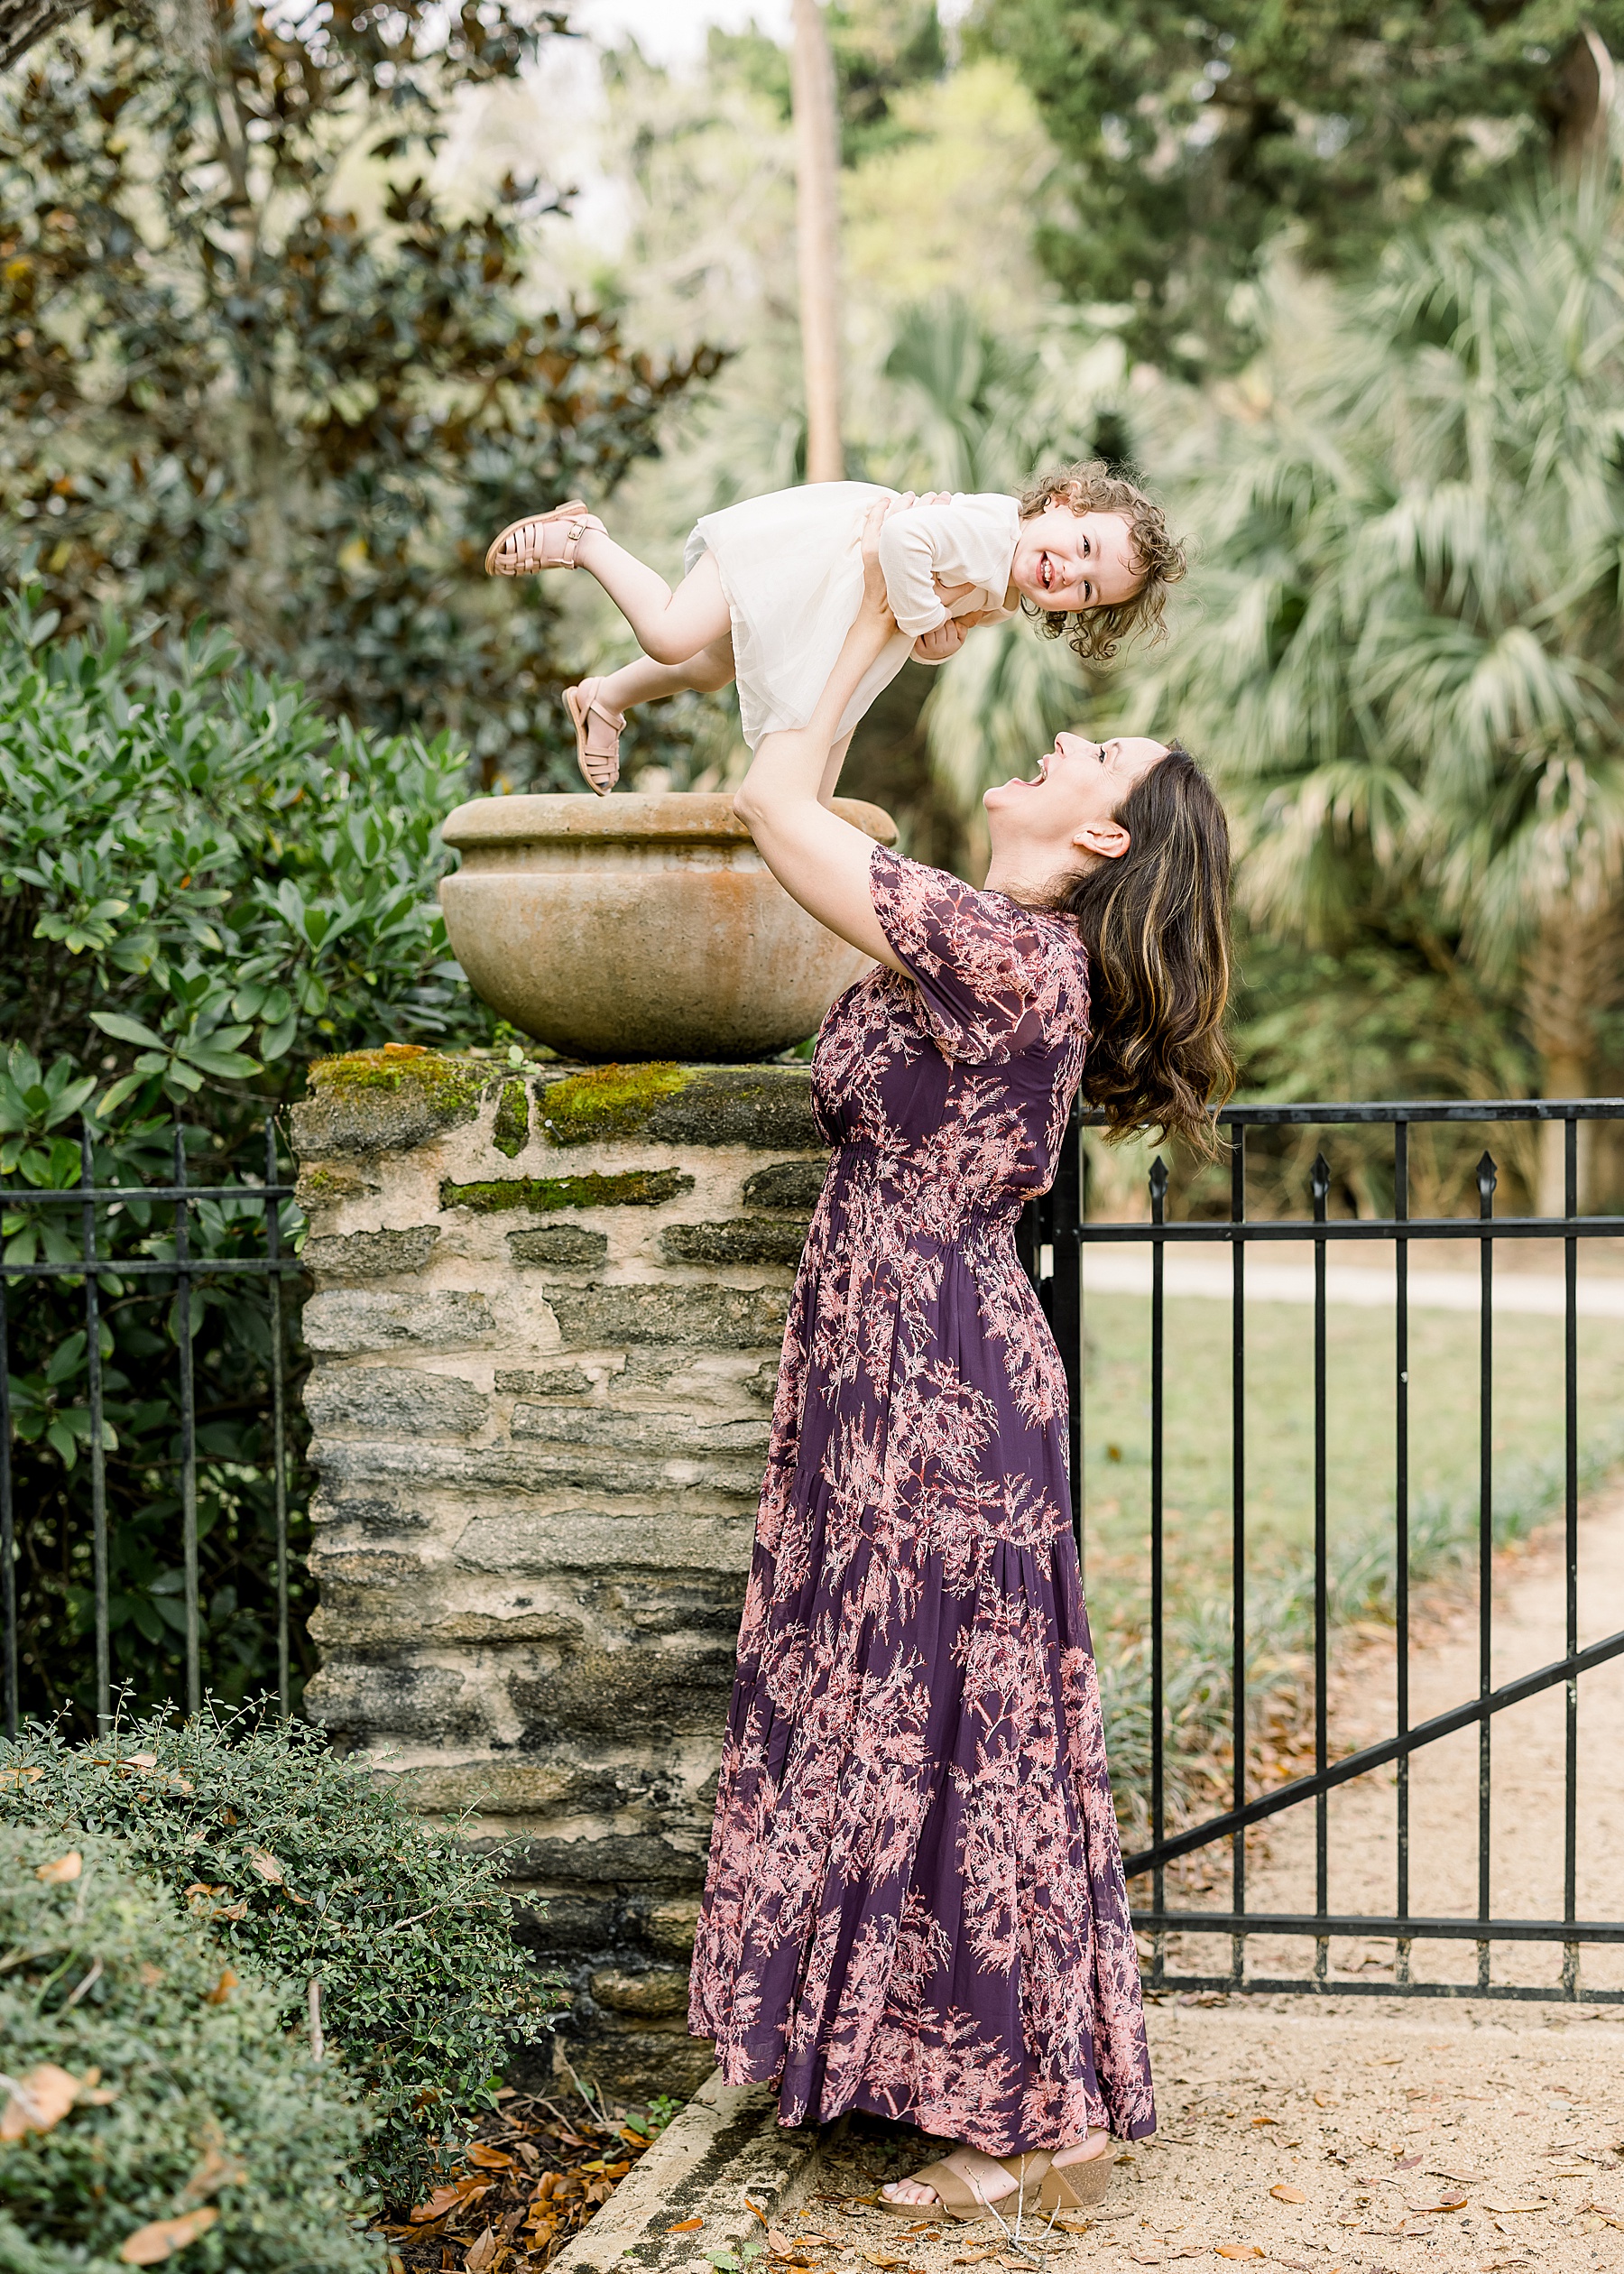 woman in purple floral maxi dress holding up little girl smiling in cream dress